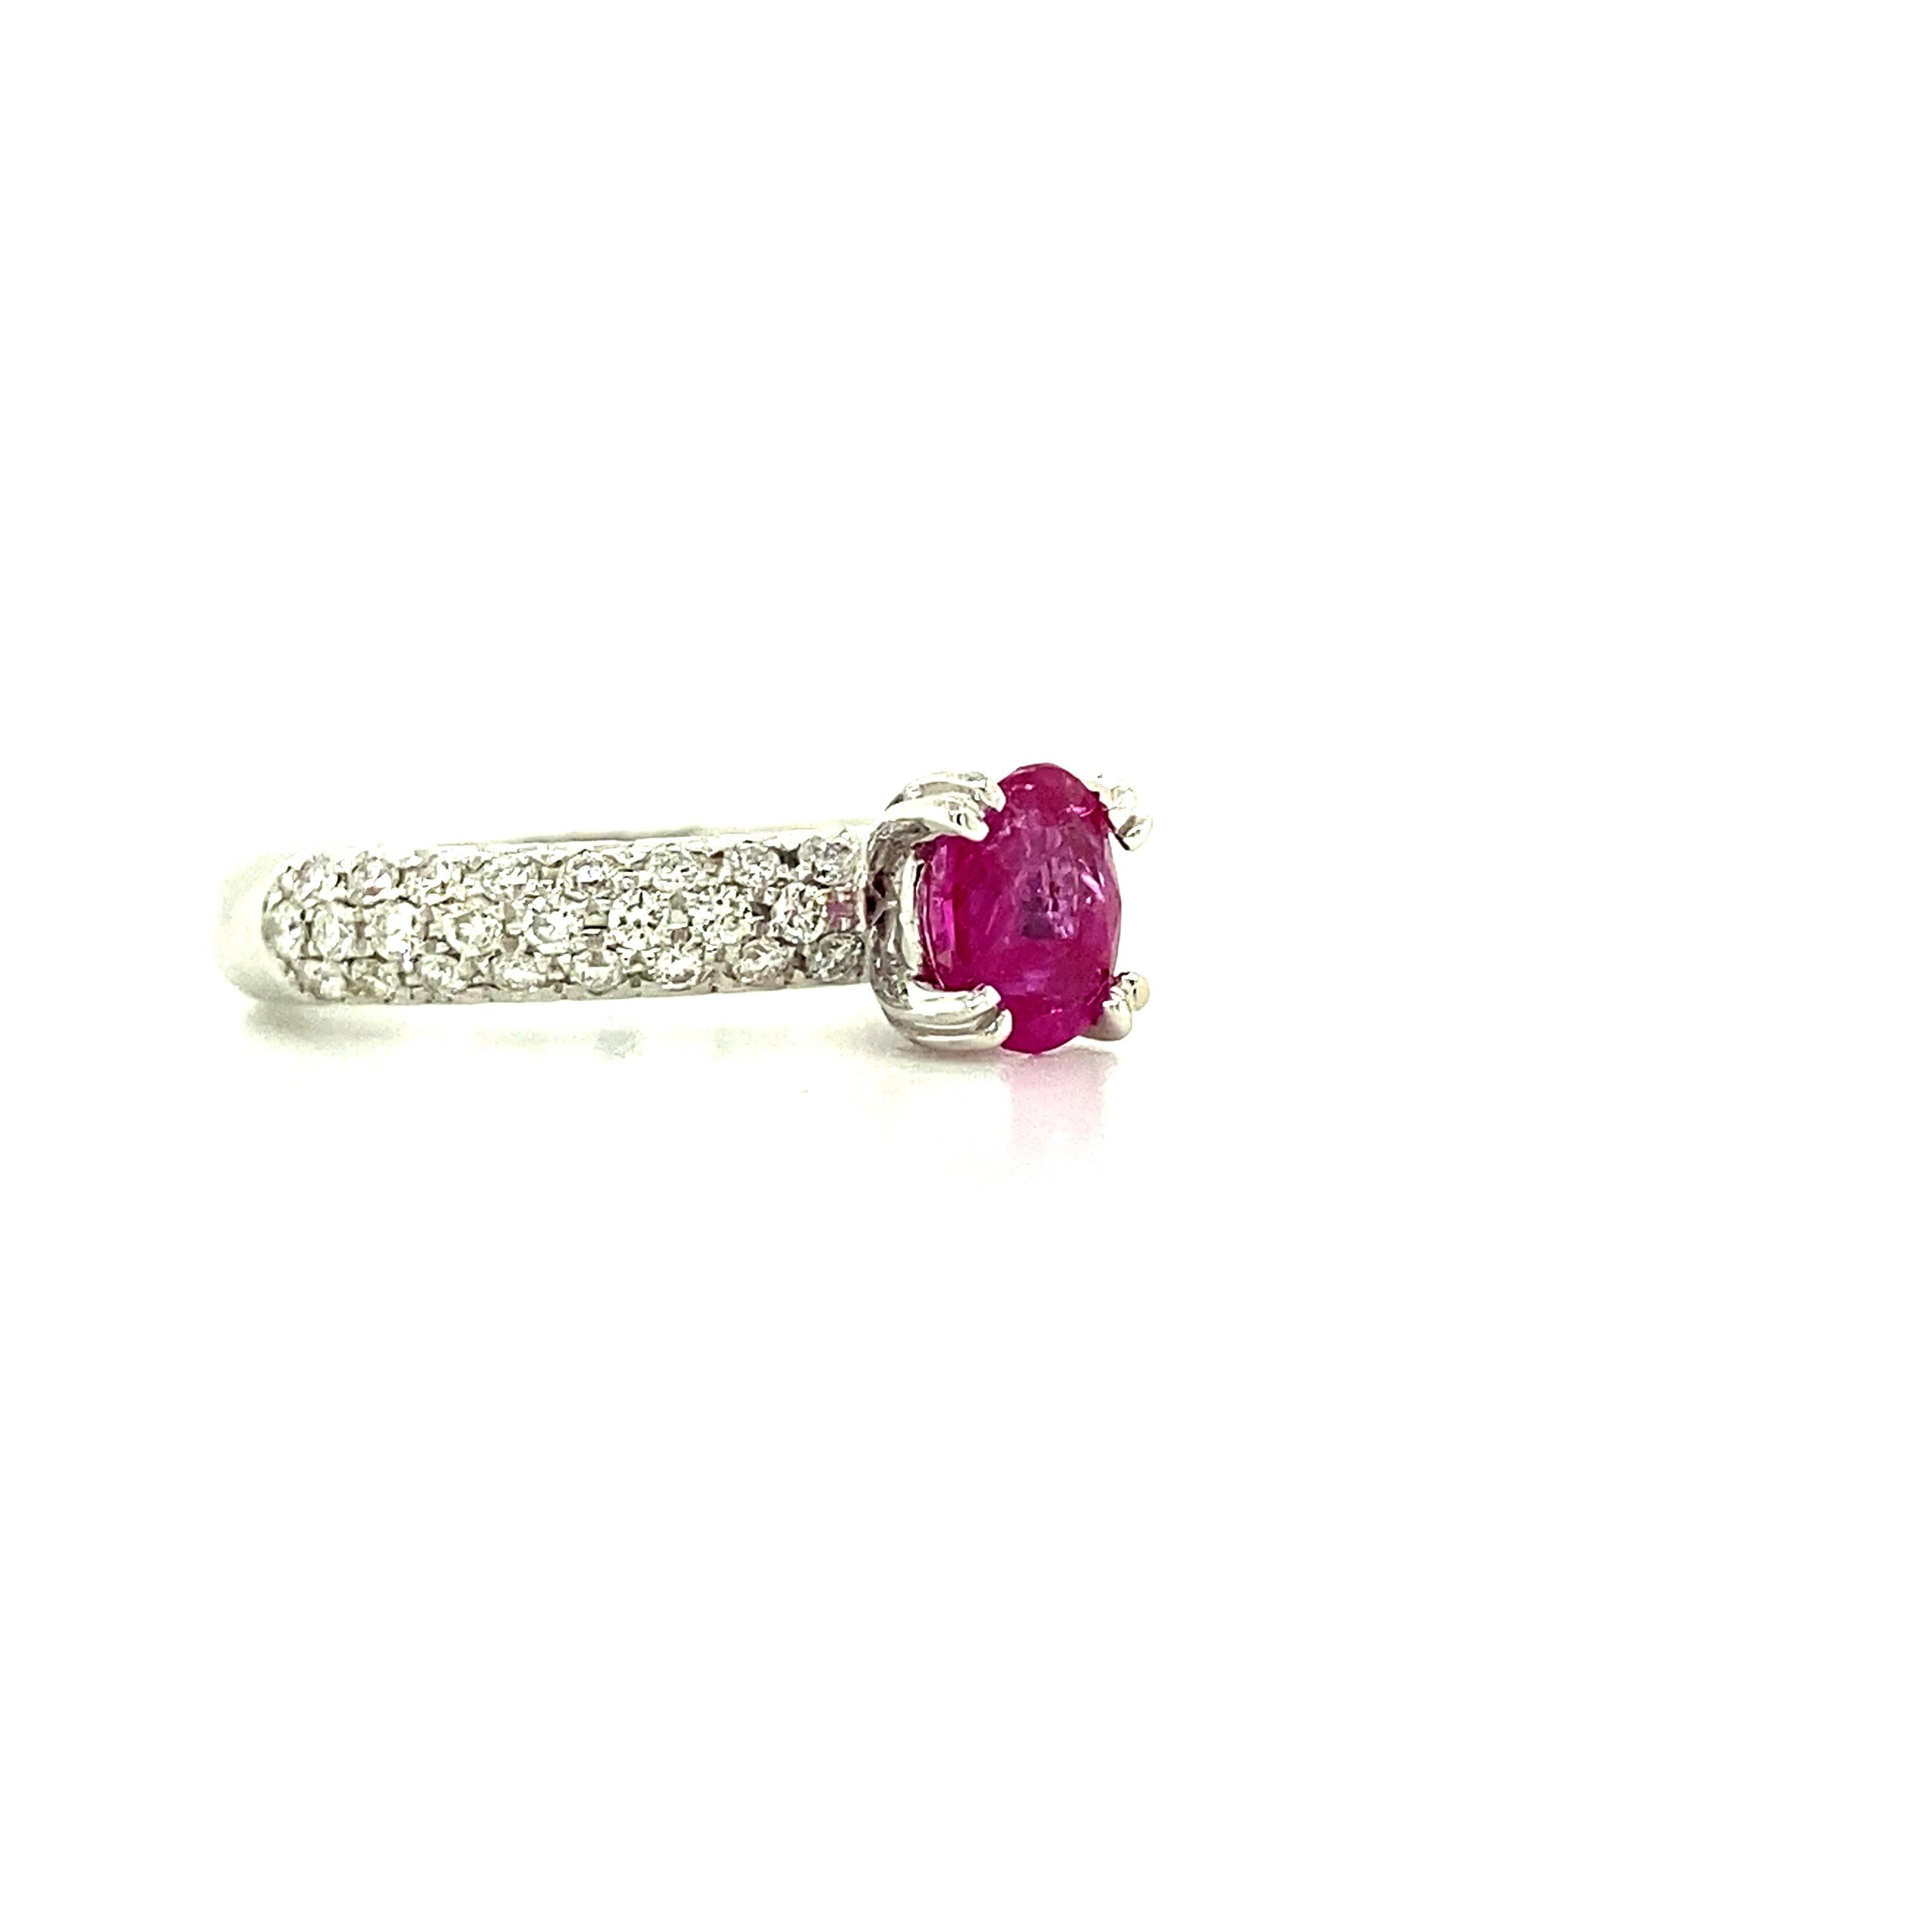 Contemporary 1.18 Carat GRS Certified Unheated Burmese Pink Sapphire and White Diamond Ring